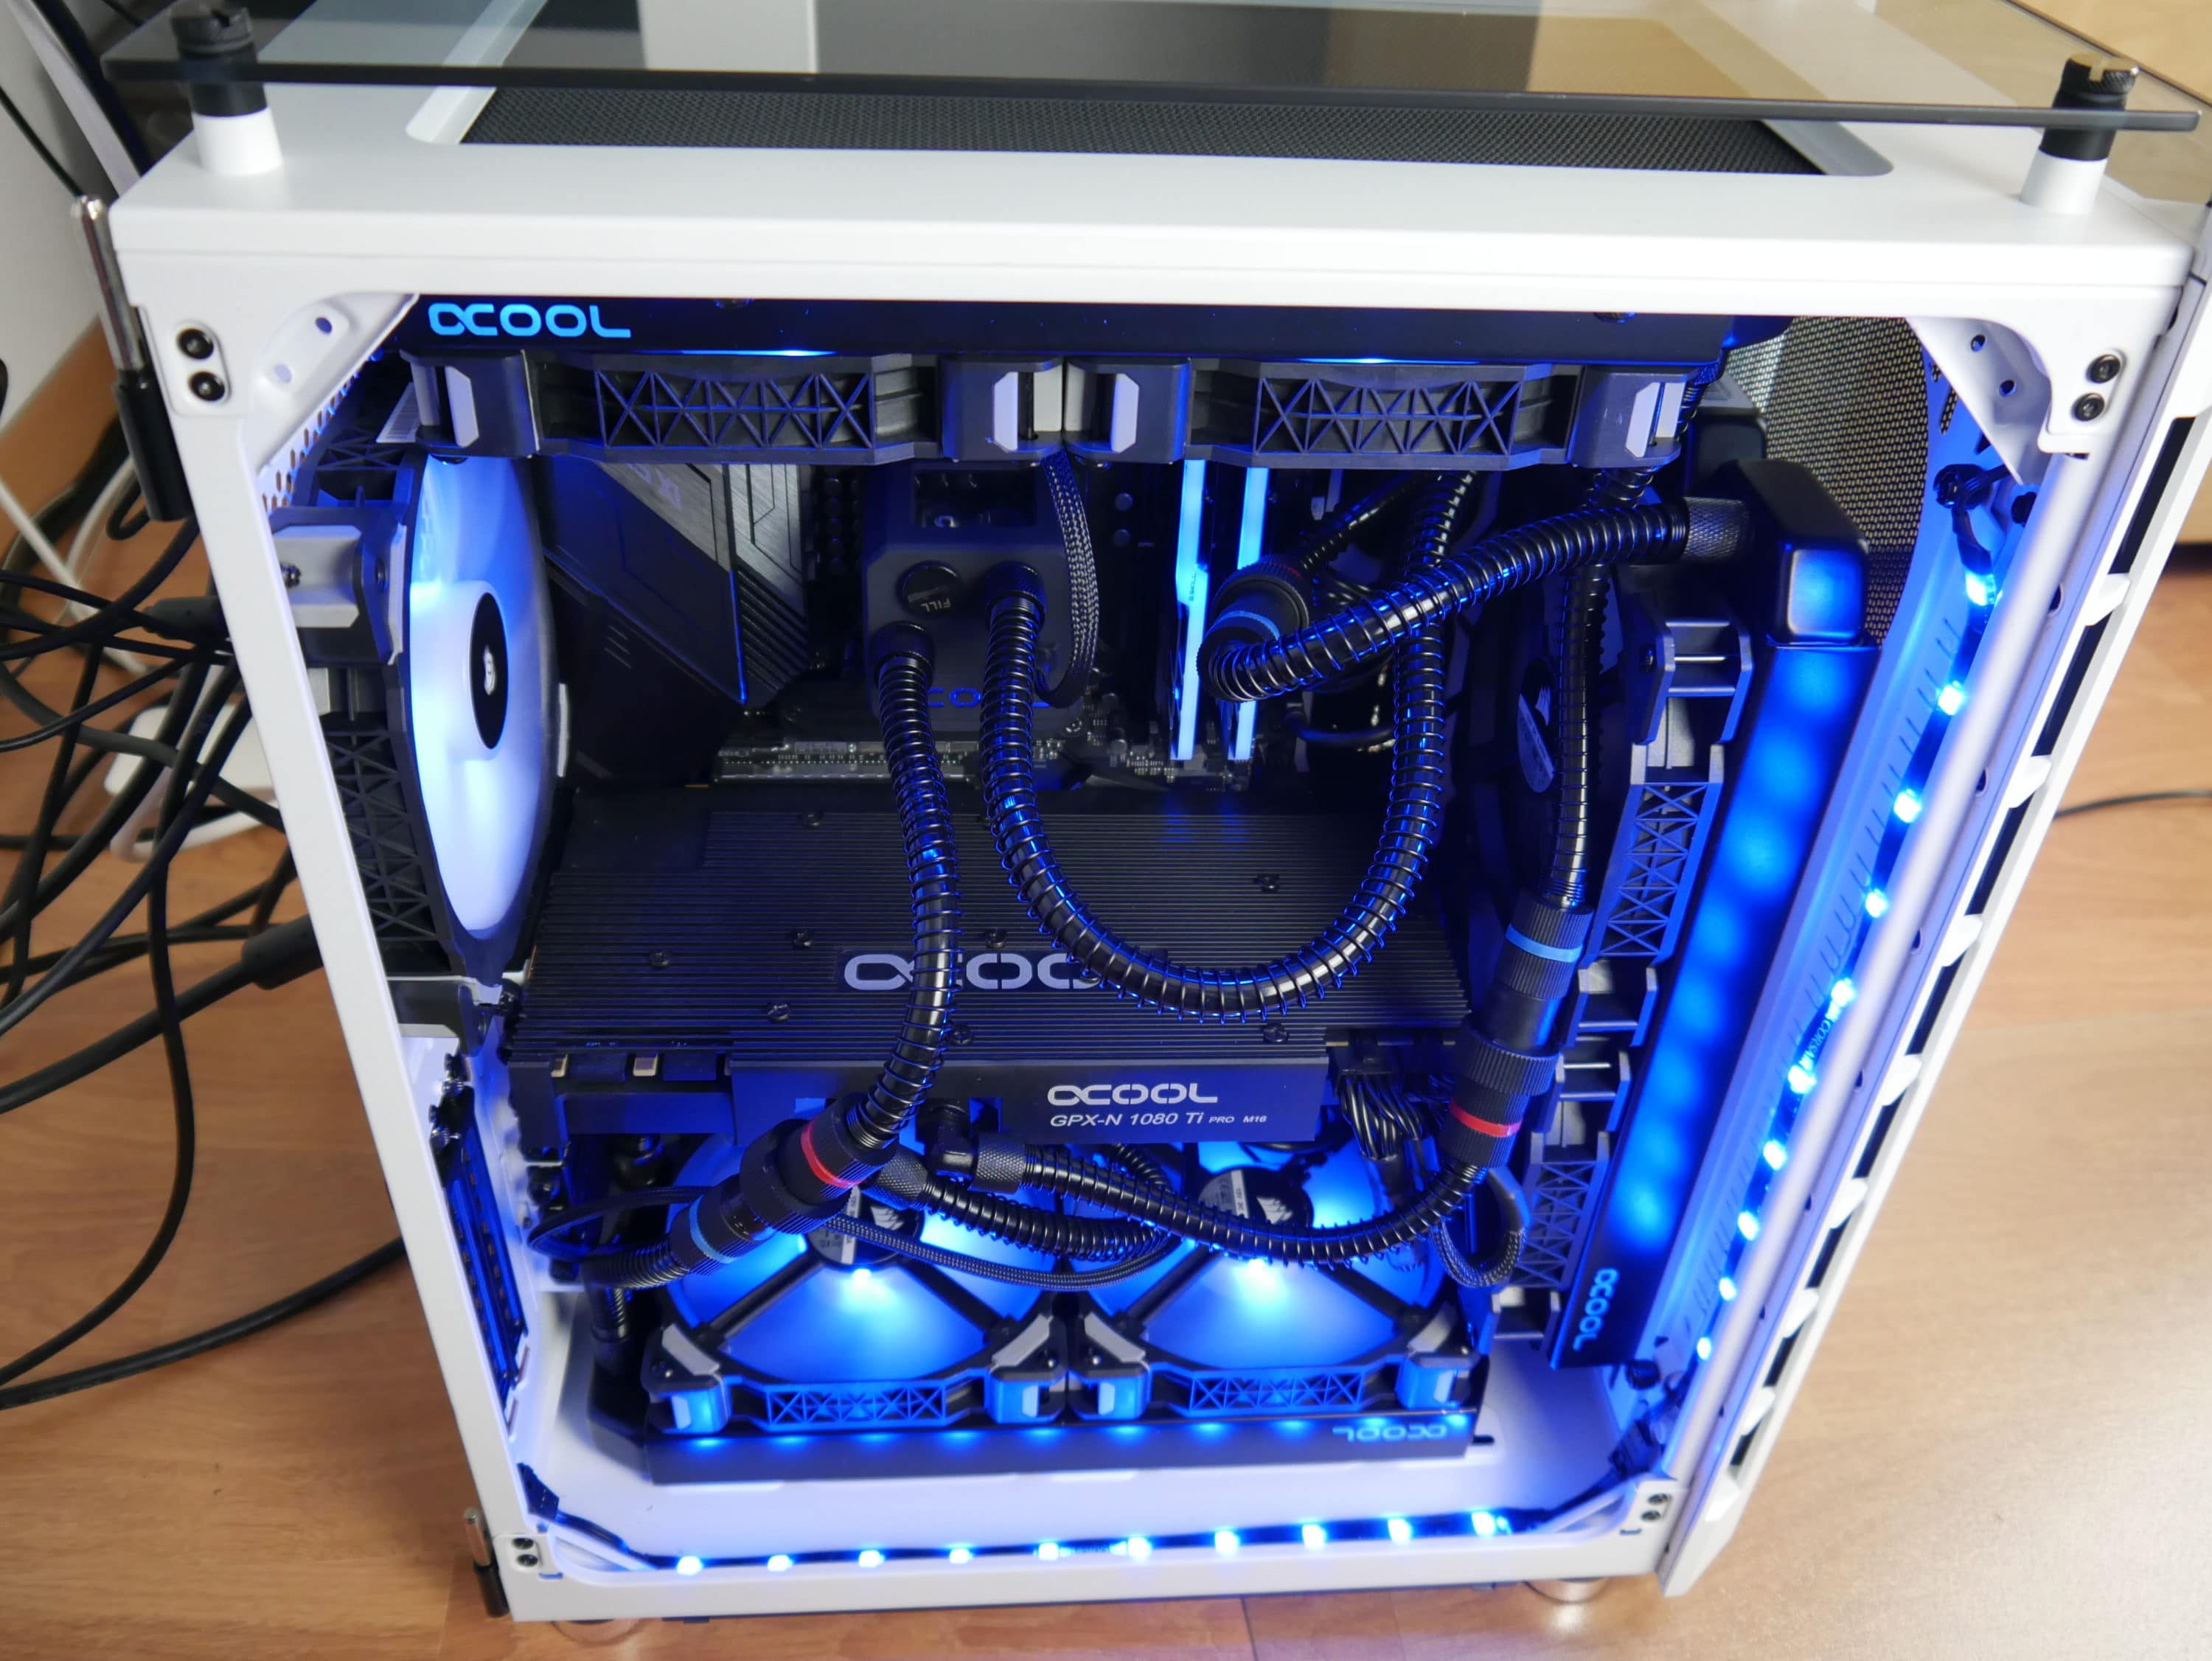 recepción Perspicaz Leve What's Really Going In? The Corsair Crystal Series 680X RGB Case Reviewed